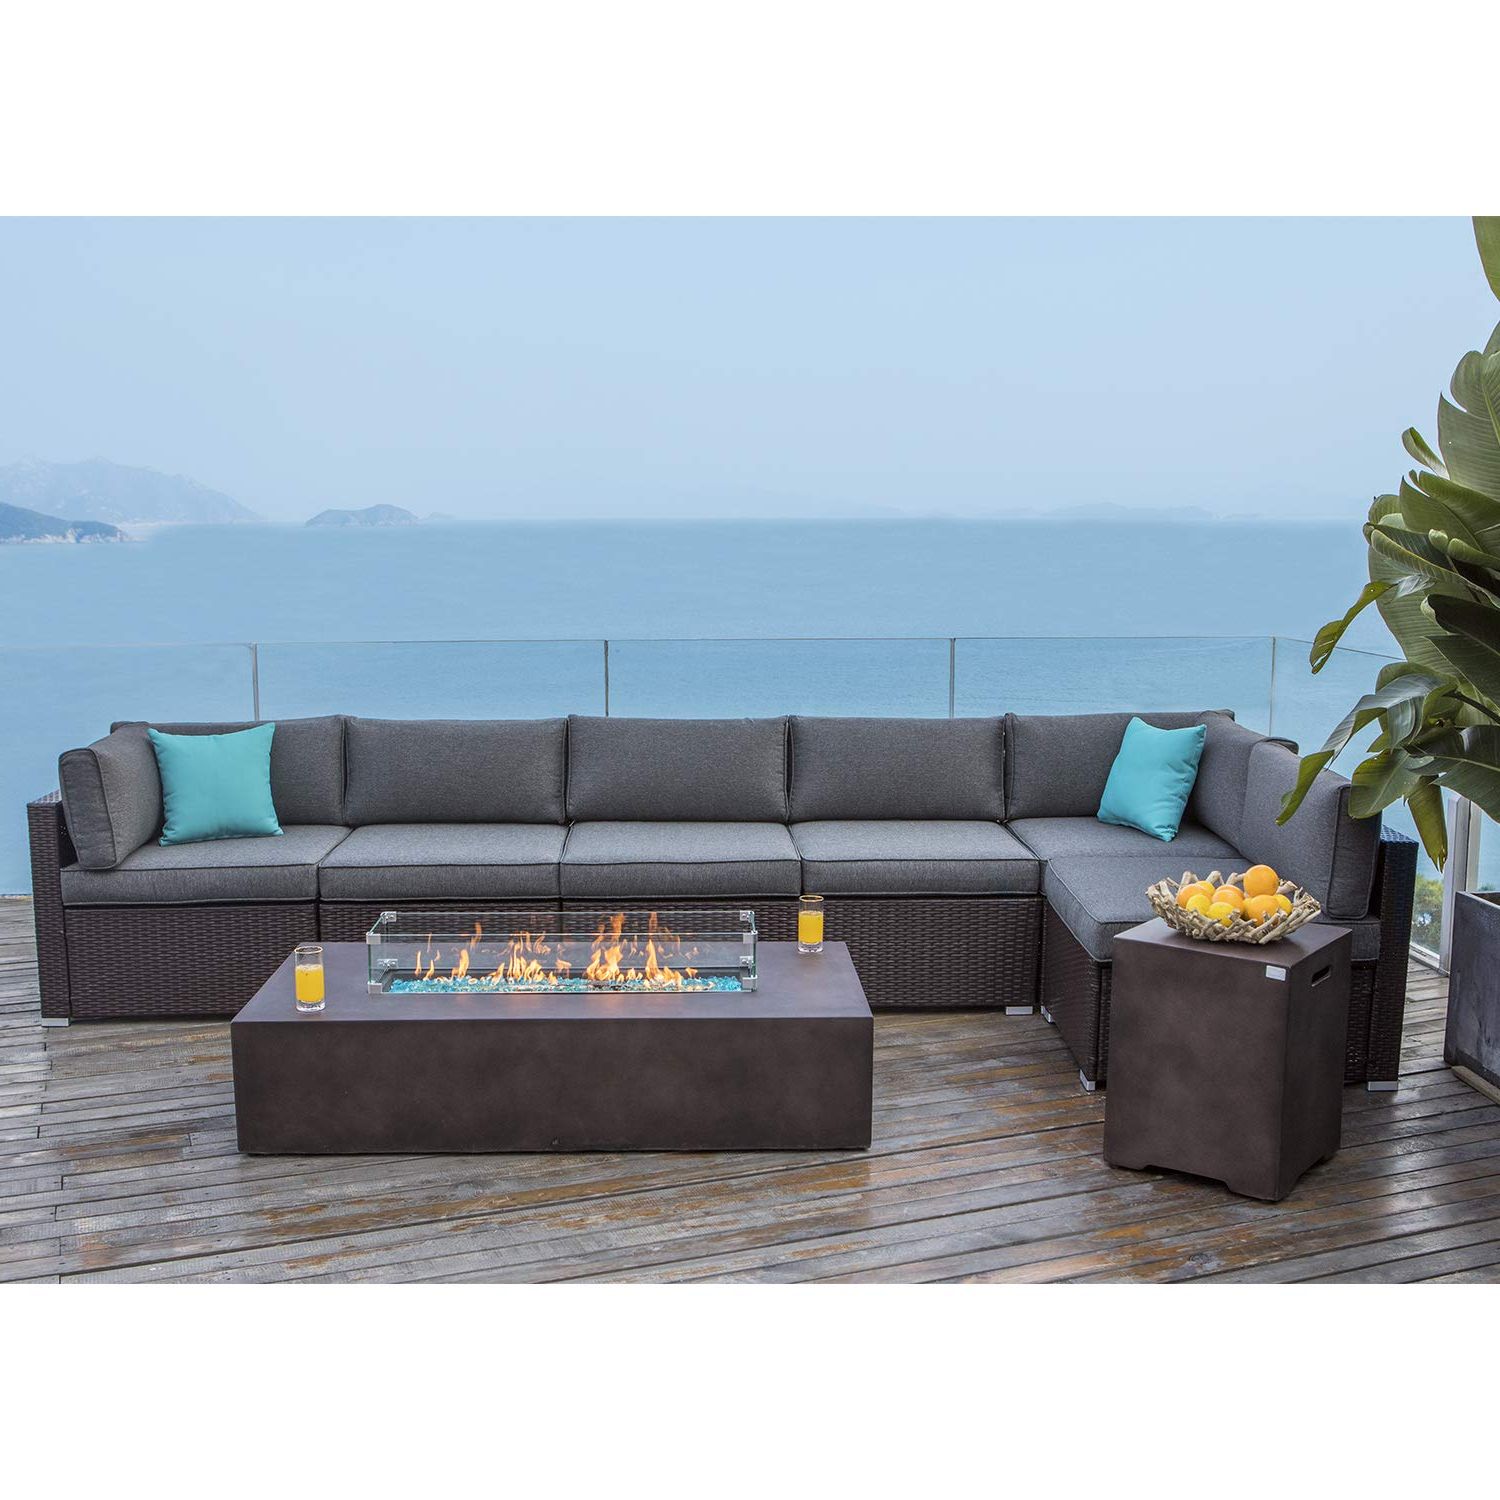 Amazon: Cosiest 9 Piece Outdoor Wicker Sectional Sofa W Fire Pit Table,chocolate  Brown Patio Furniture Set W 56 X 28 Inches Rectangle Bronze Fire Table  (50,000 Btu) And Tank Outside(20lb) For Garden : Throughout Most Popular Fire Pit Table Wicker Sectional Sofa Set (View 14 of 15)